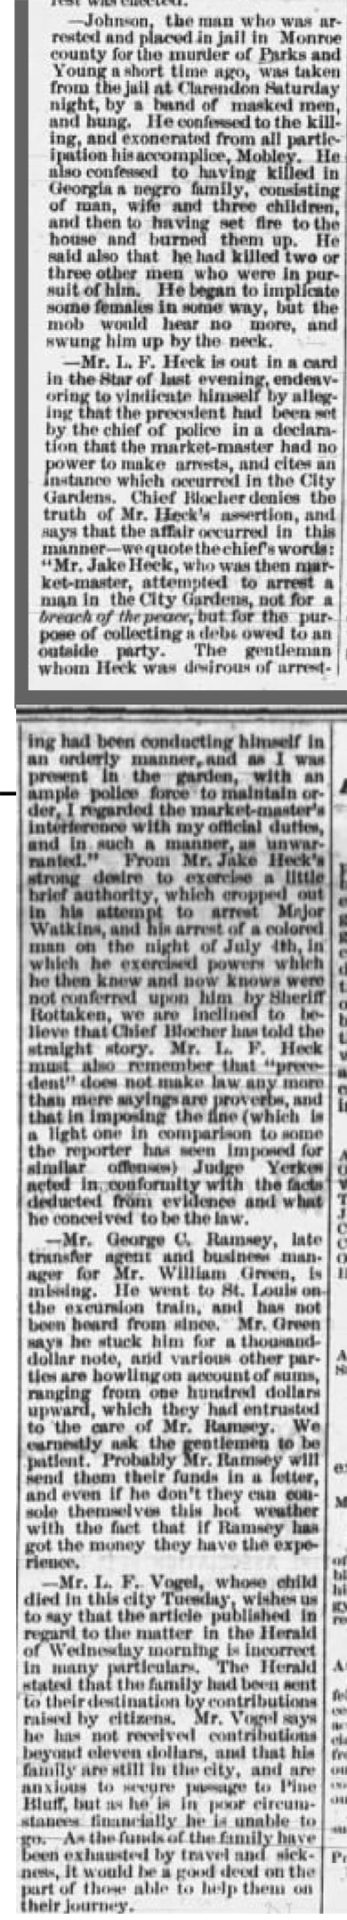 "Johnson the man who was arrested and placed in jail in Monroe county for the murder of Parks and Young a short time ago" newspaper clipping